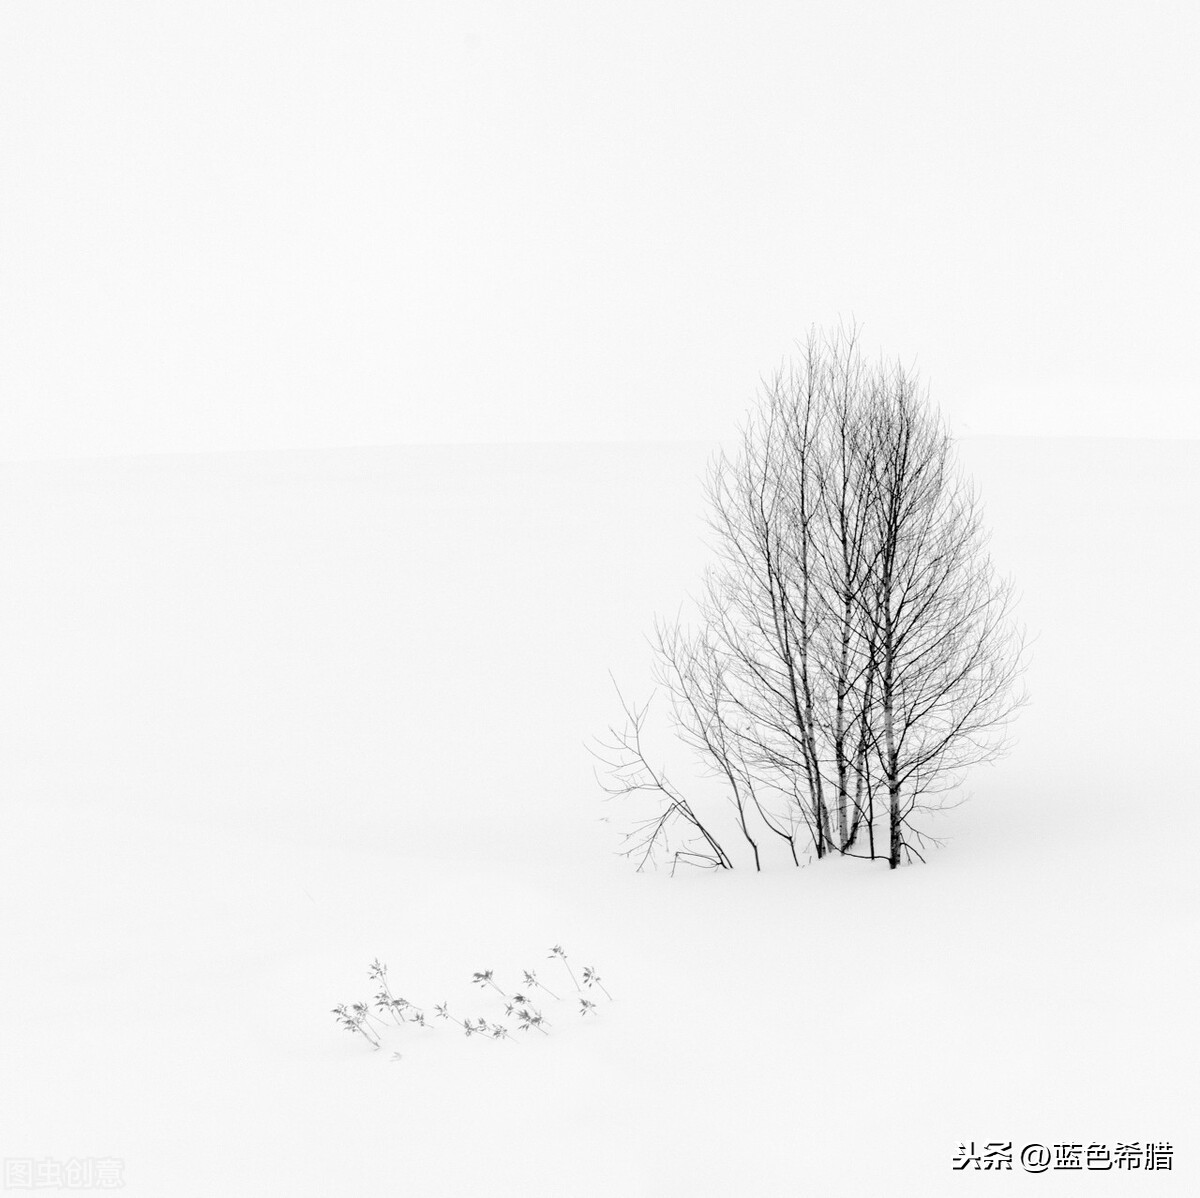 How is snow scene little respect patted good-looking? Graph of 9 pieces of give typical examples teachs you 3 photography skill, take beautiful winter view